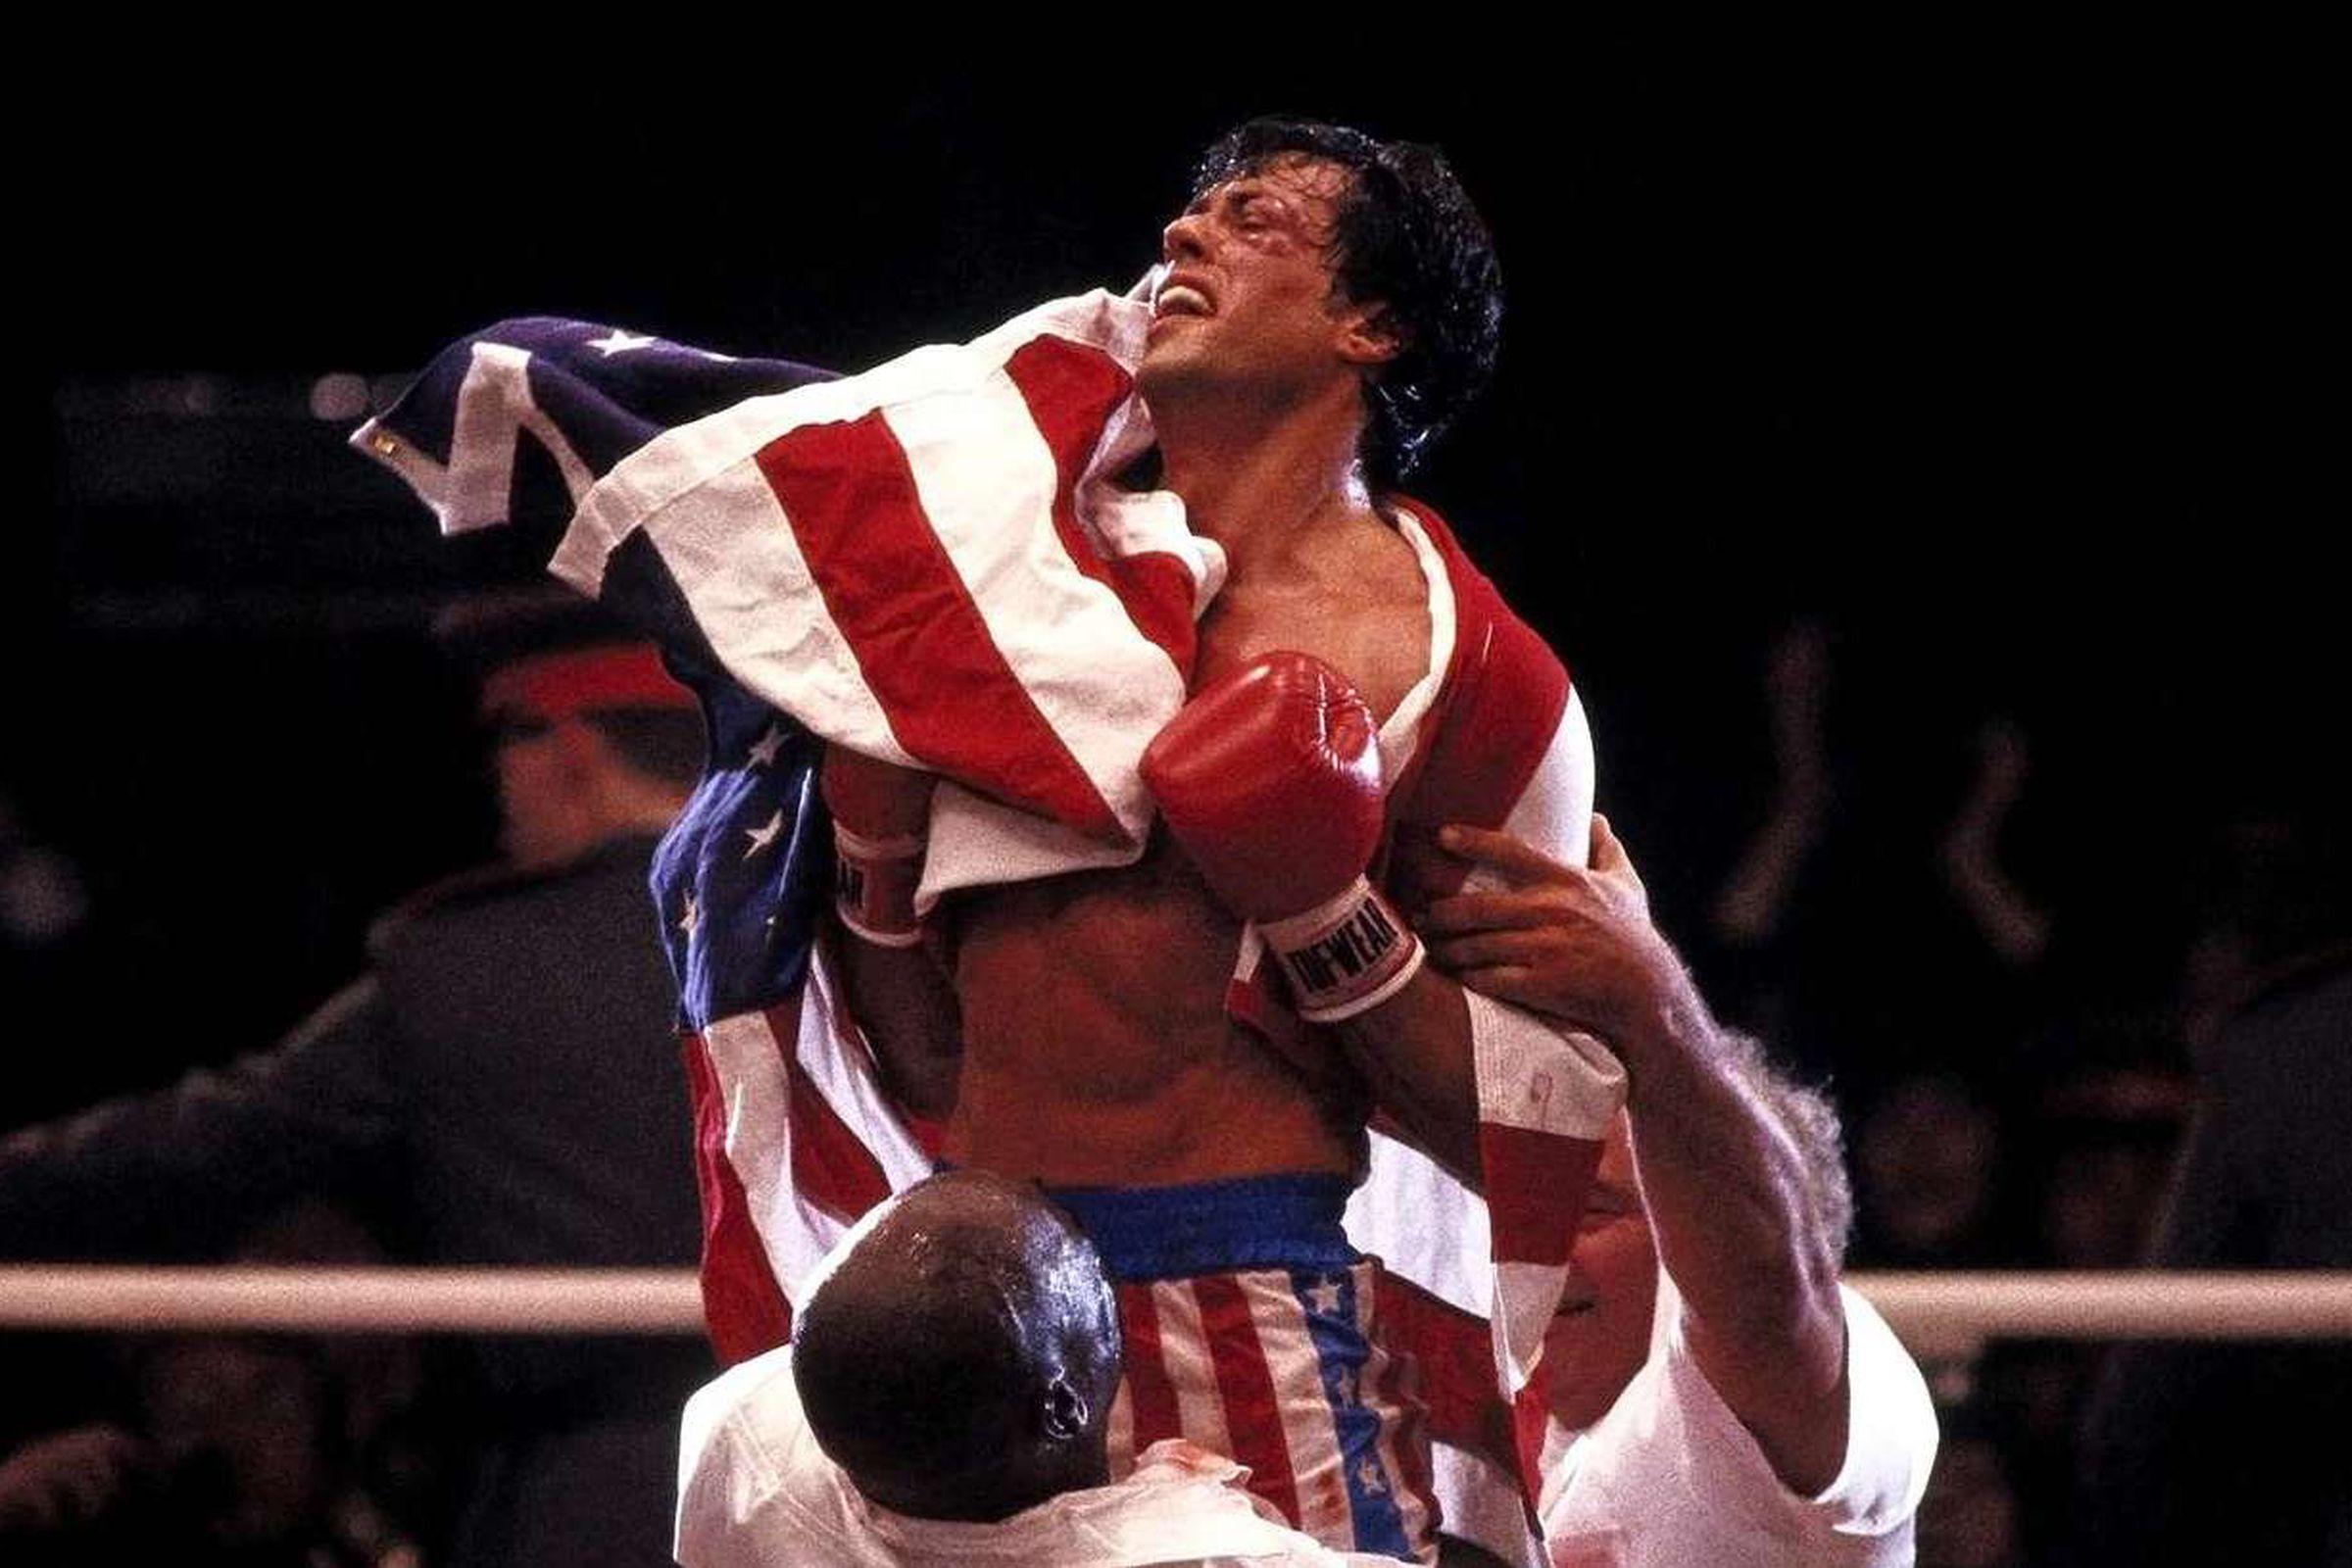 A bruised boxer wrapped in an American flag being housed up by two other men wearing white shirts.